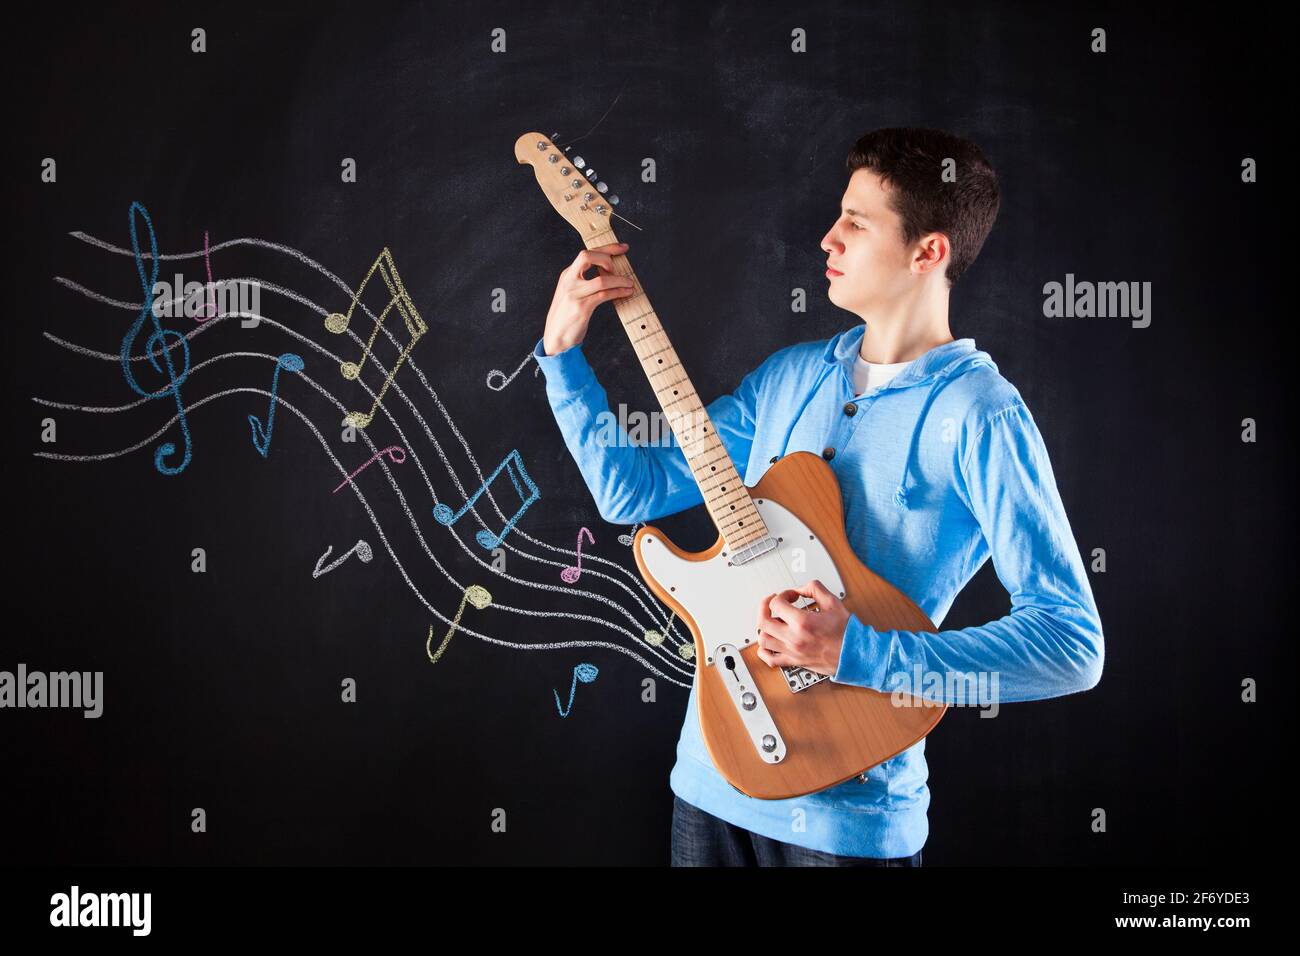 Teenager holding an electric guitar next to a blackboard Stock Photo